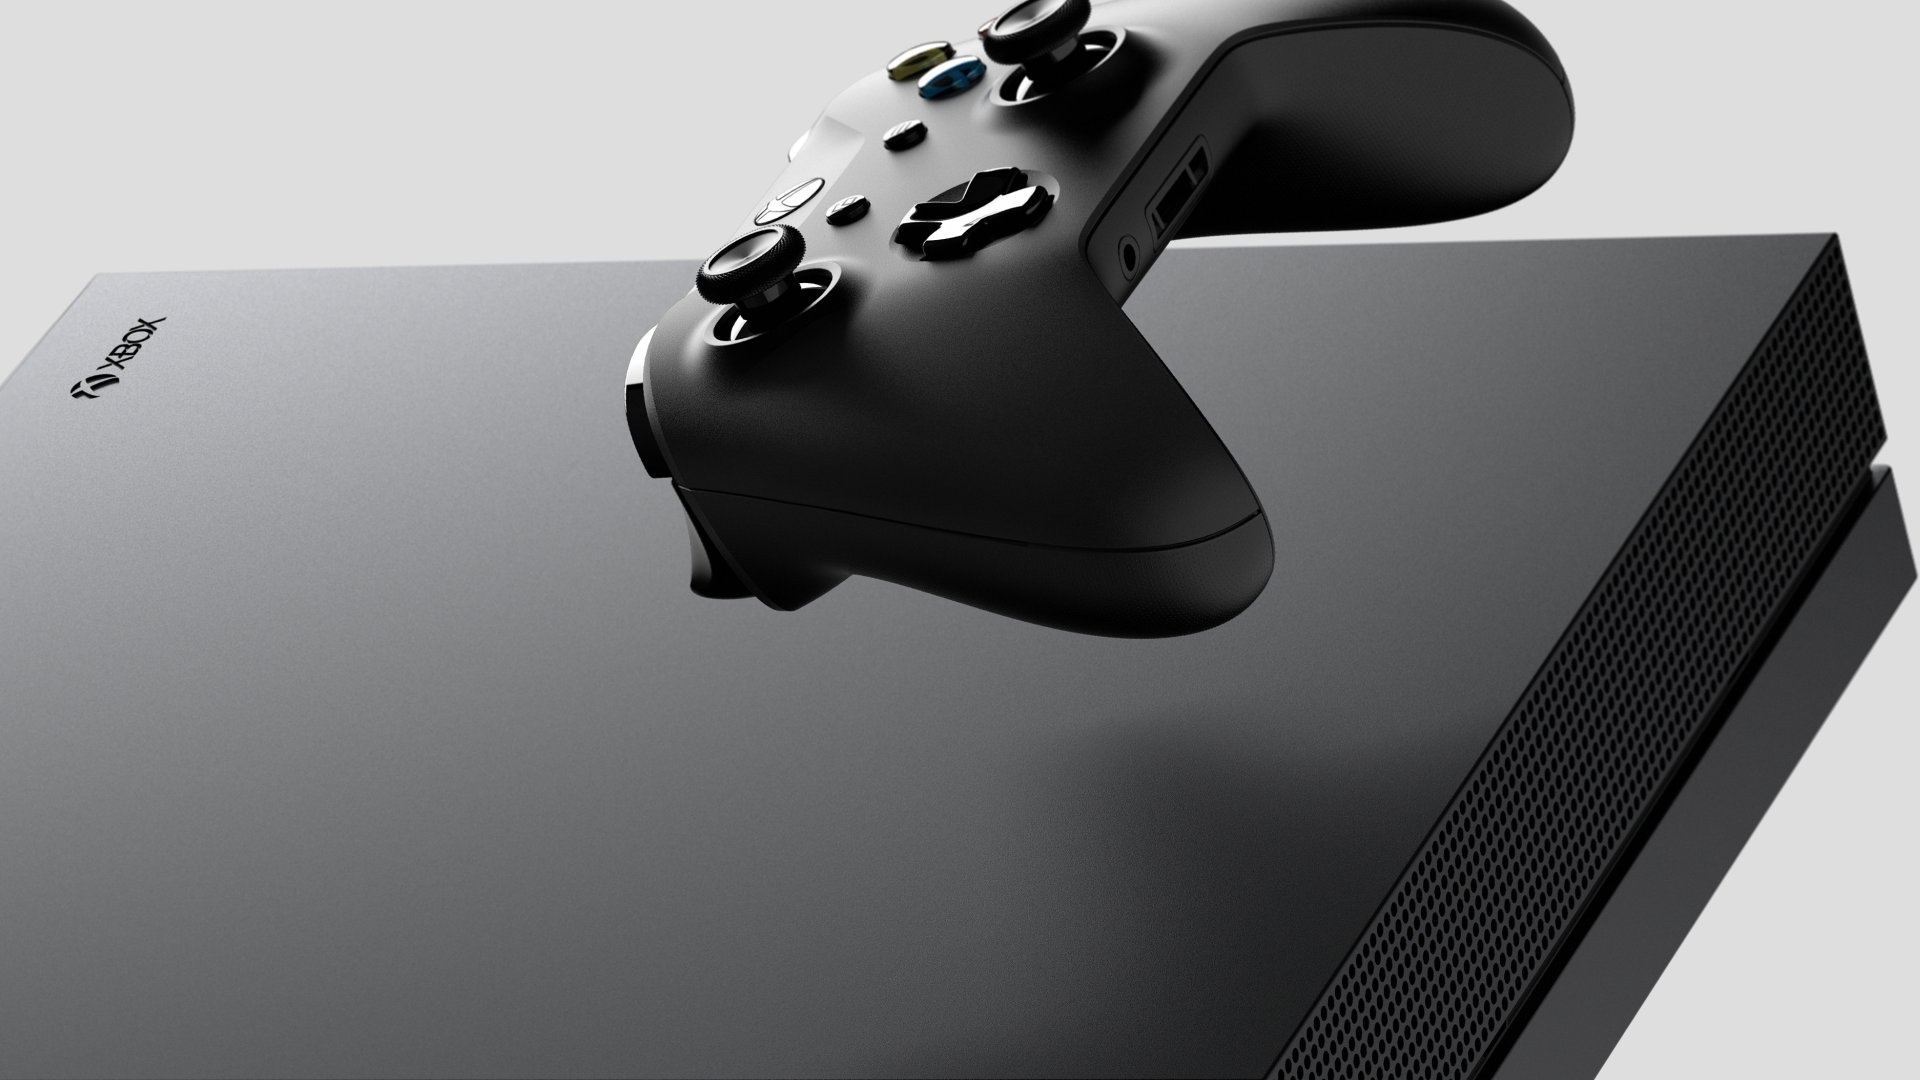 Xbox: The console with built-in 4K Ultra HD Blu-ray player, Video game. 1920x1080 Full HD Wallpaper.